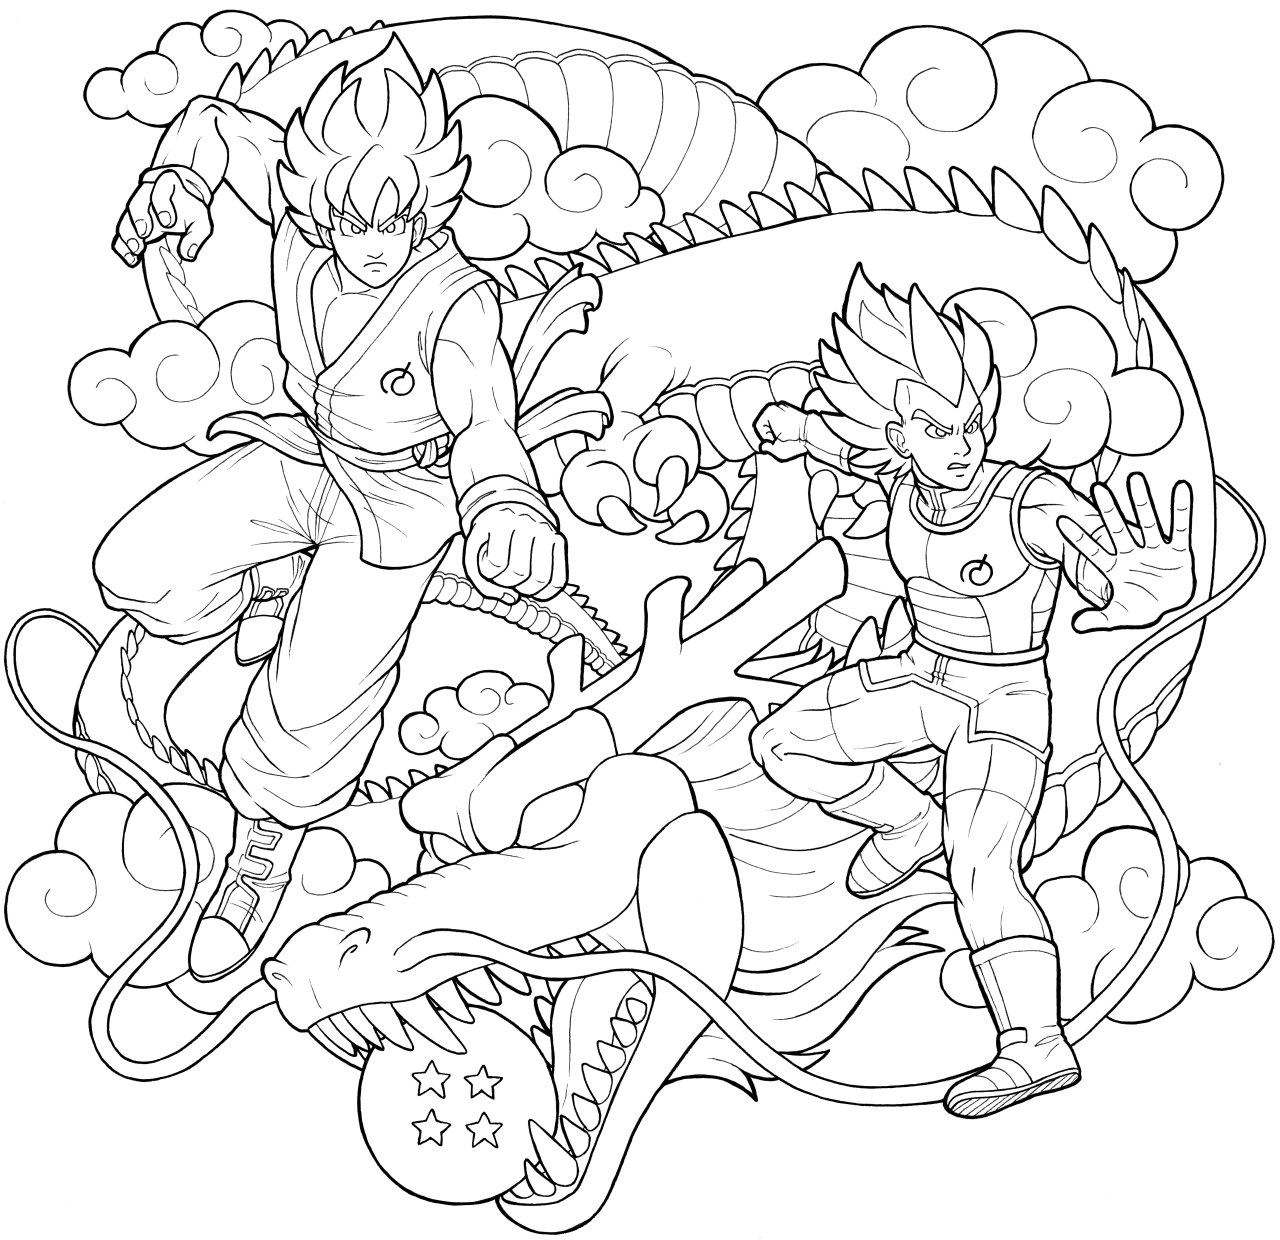 Coloring Book — Coloring Book page made by me. Feel free to...